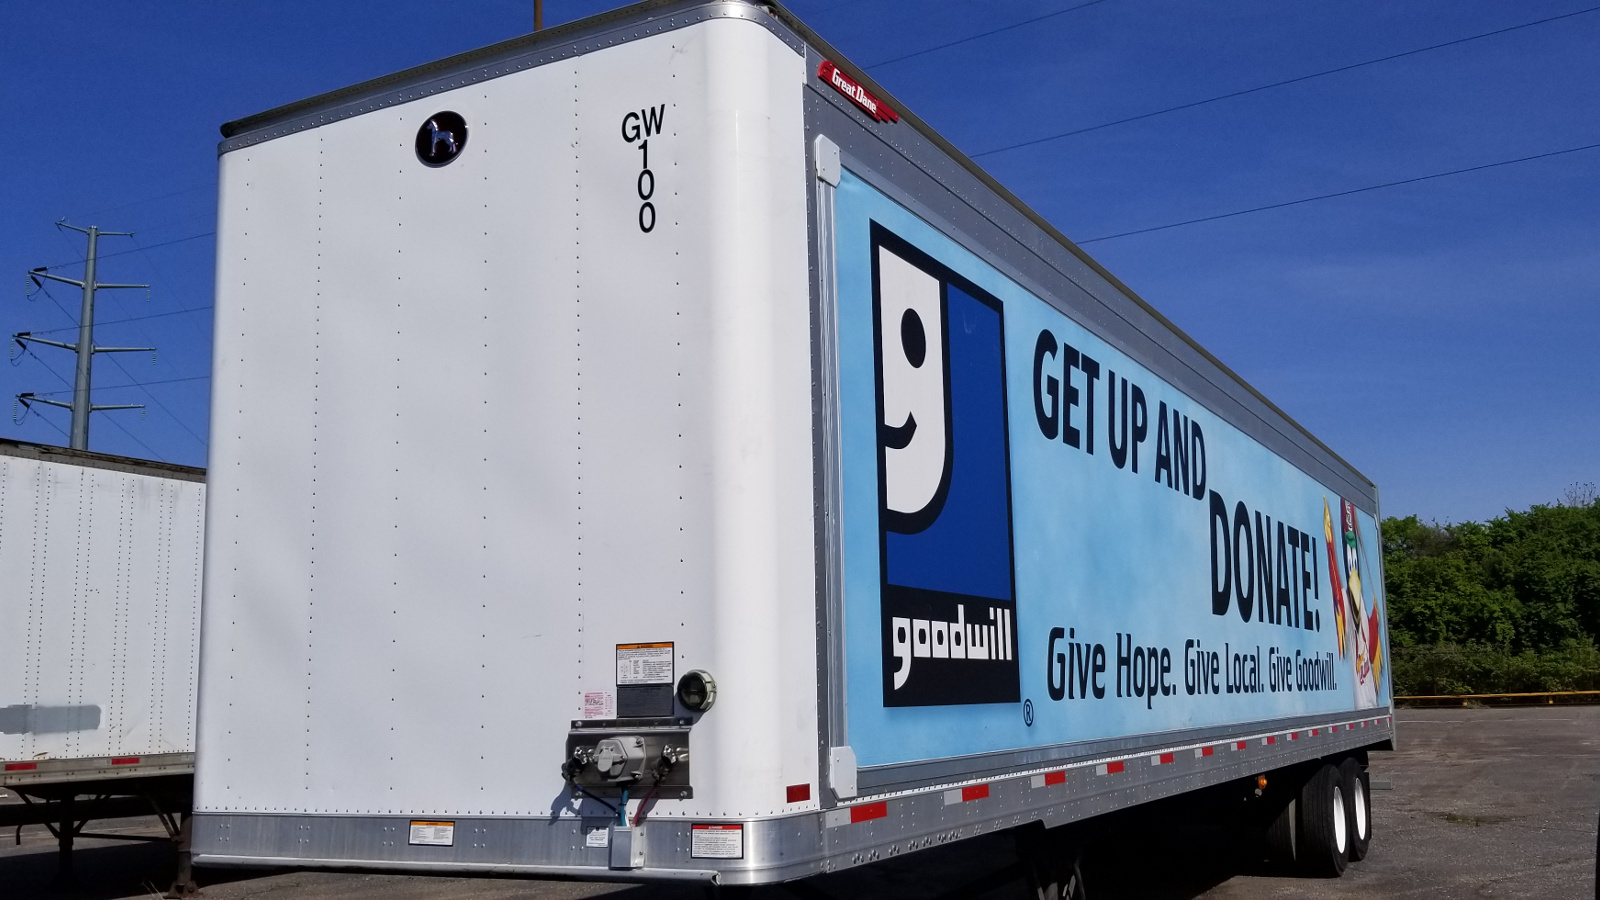 Commercial Vehicle Wraps Use These Powerful Calls To Action